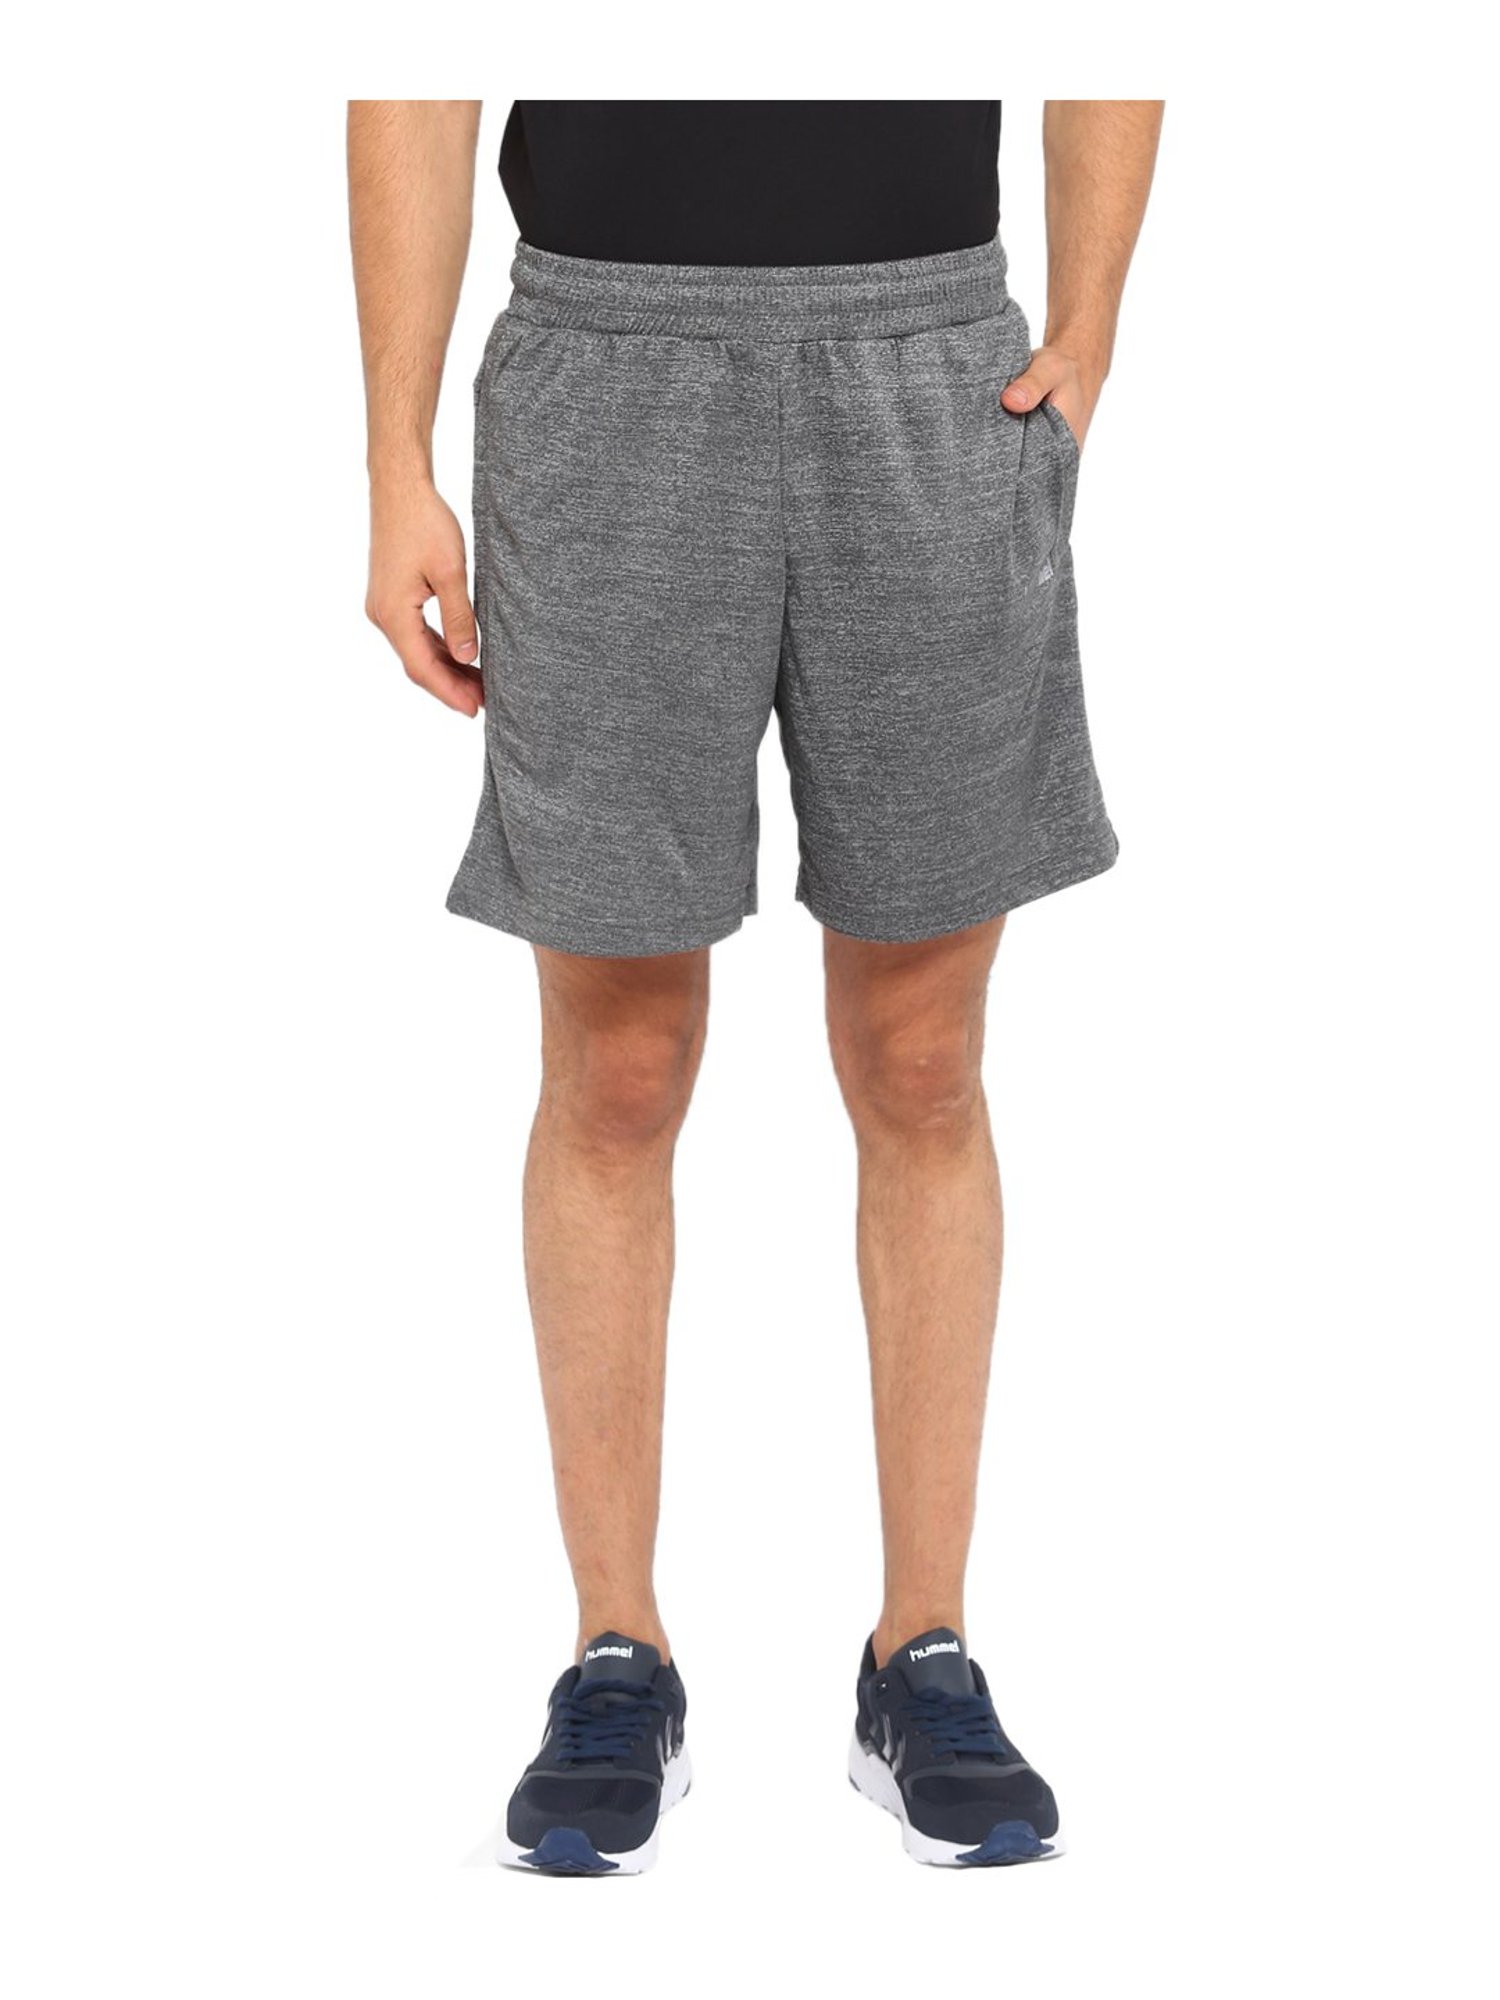 Buy Laser Grey Shorts at Best Prices | CLiQ